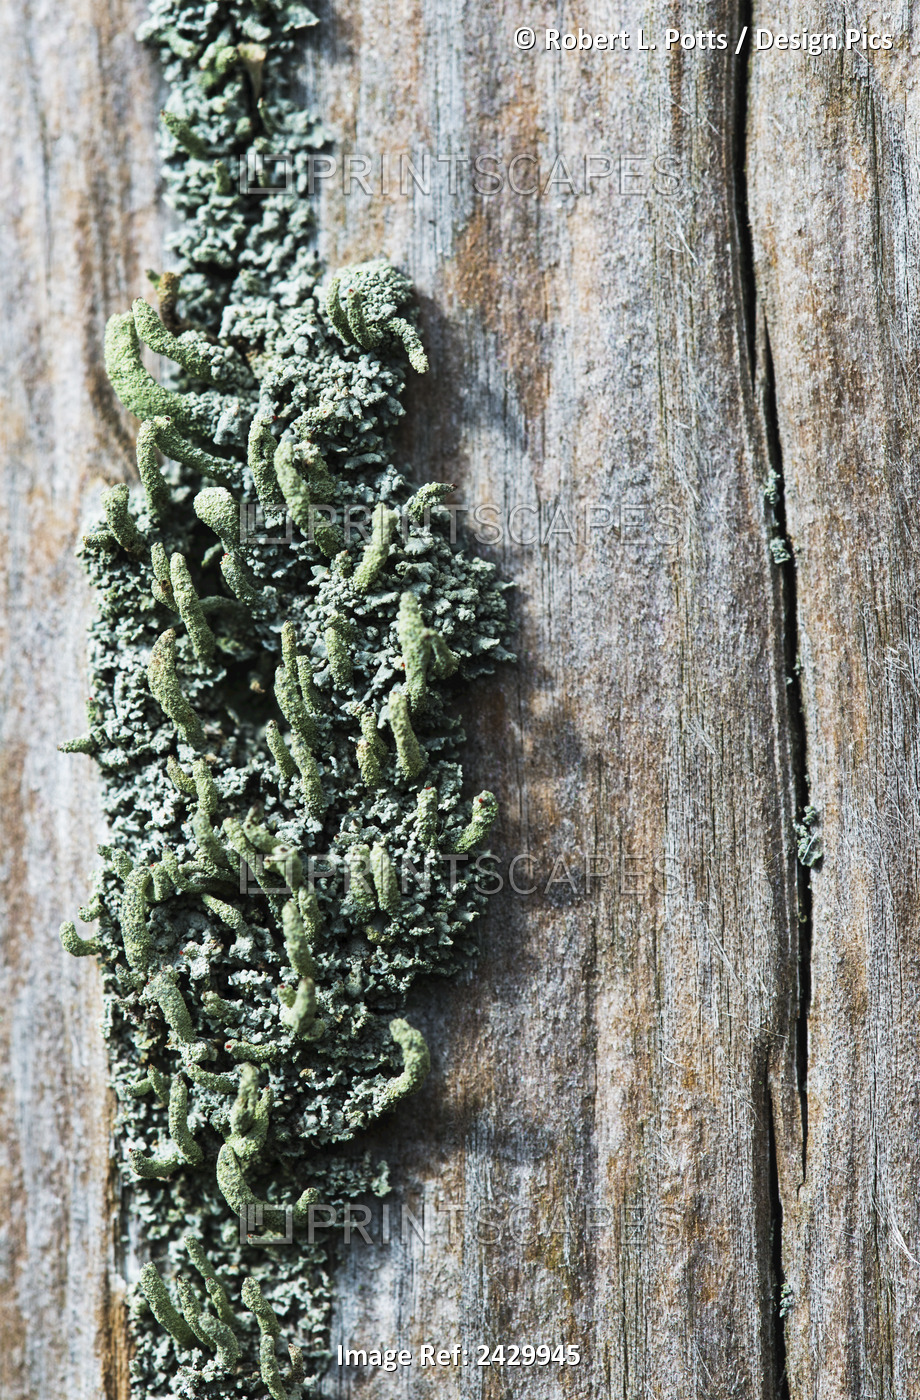 Lichen Grow On A Fence Post; Astoria, Oregon, United States Of America